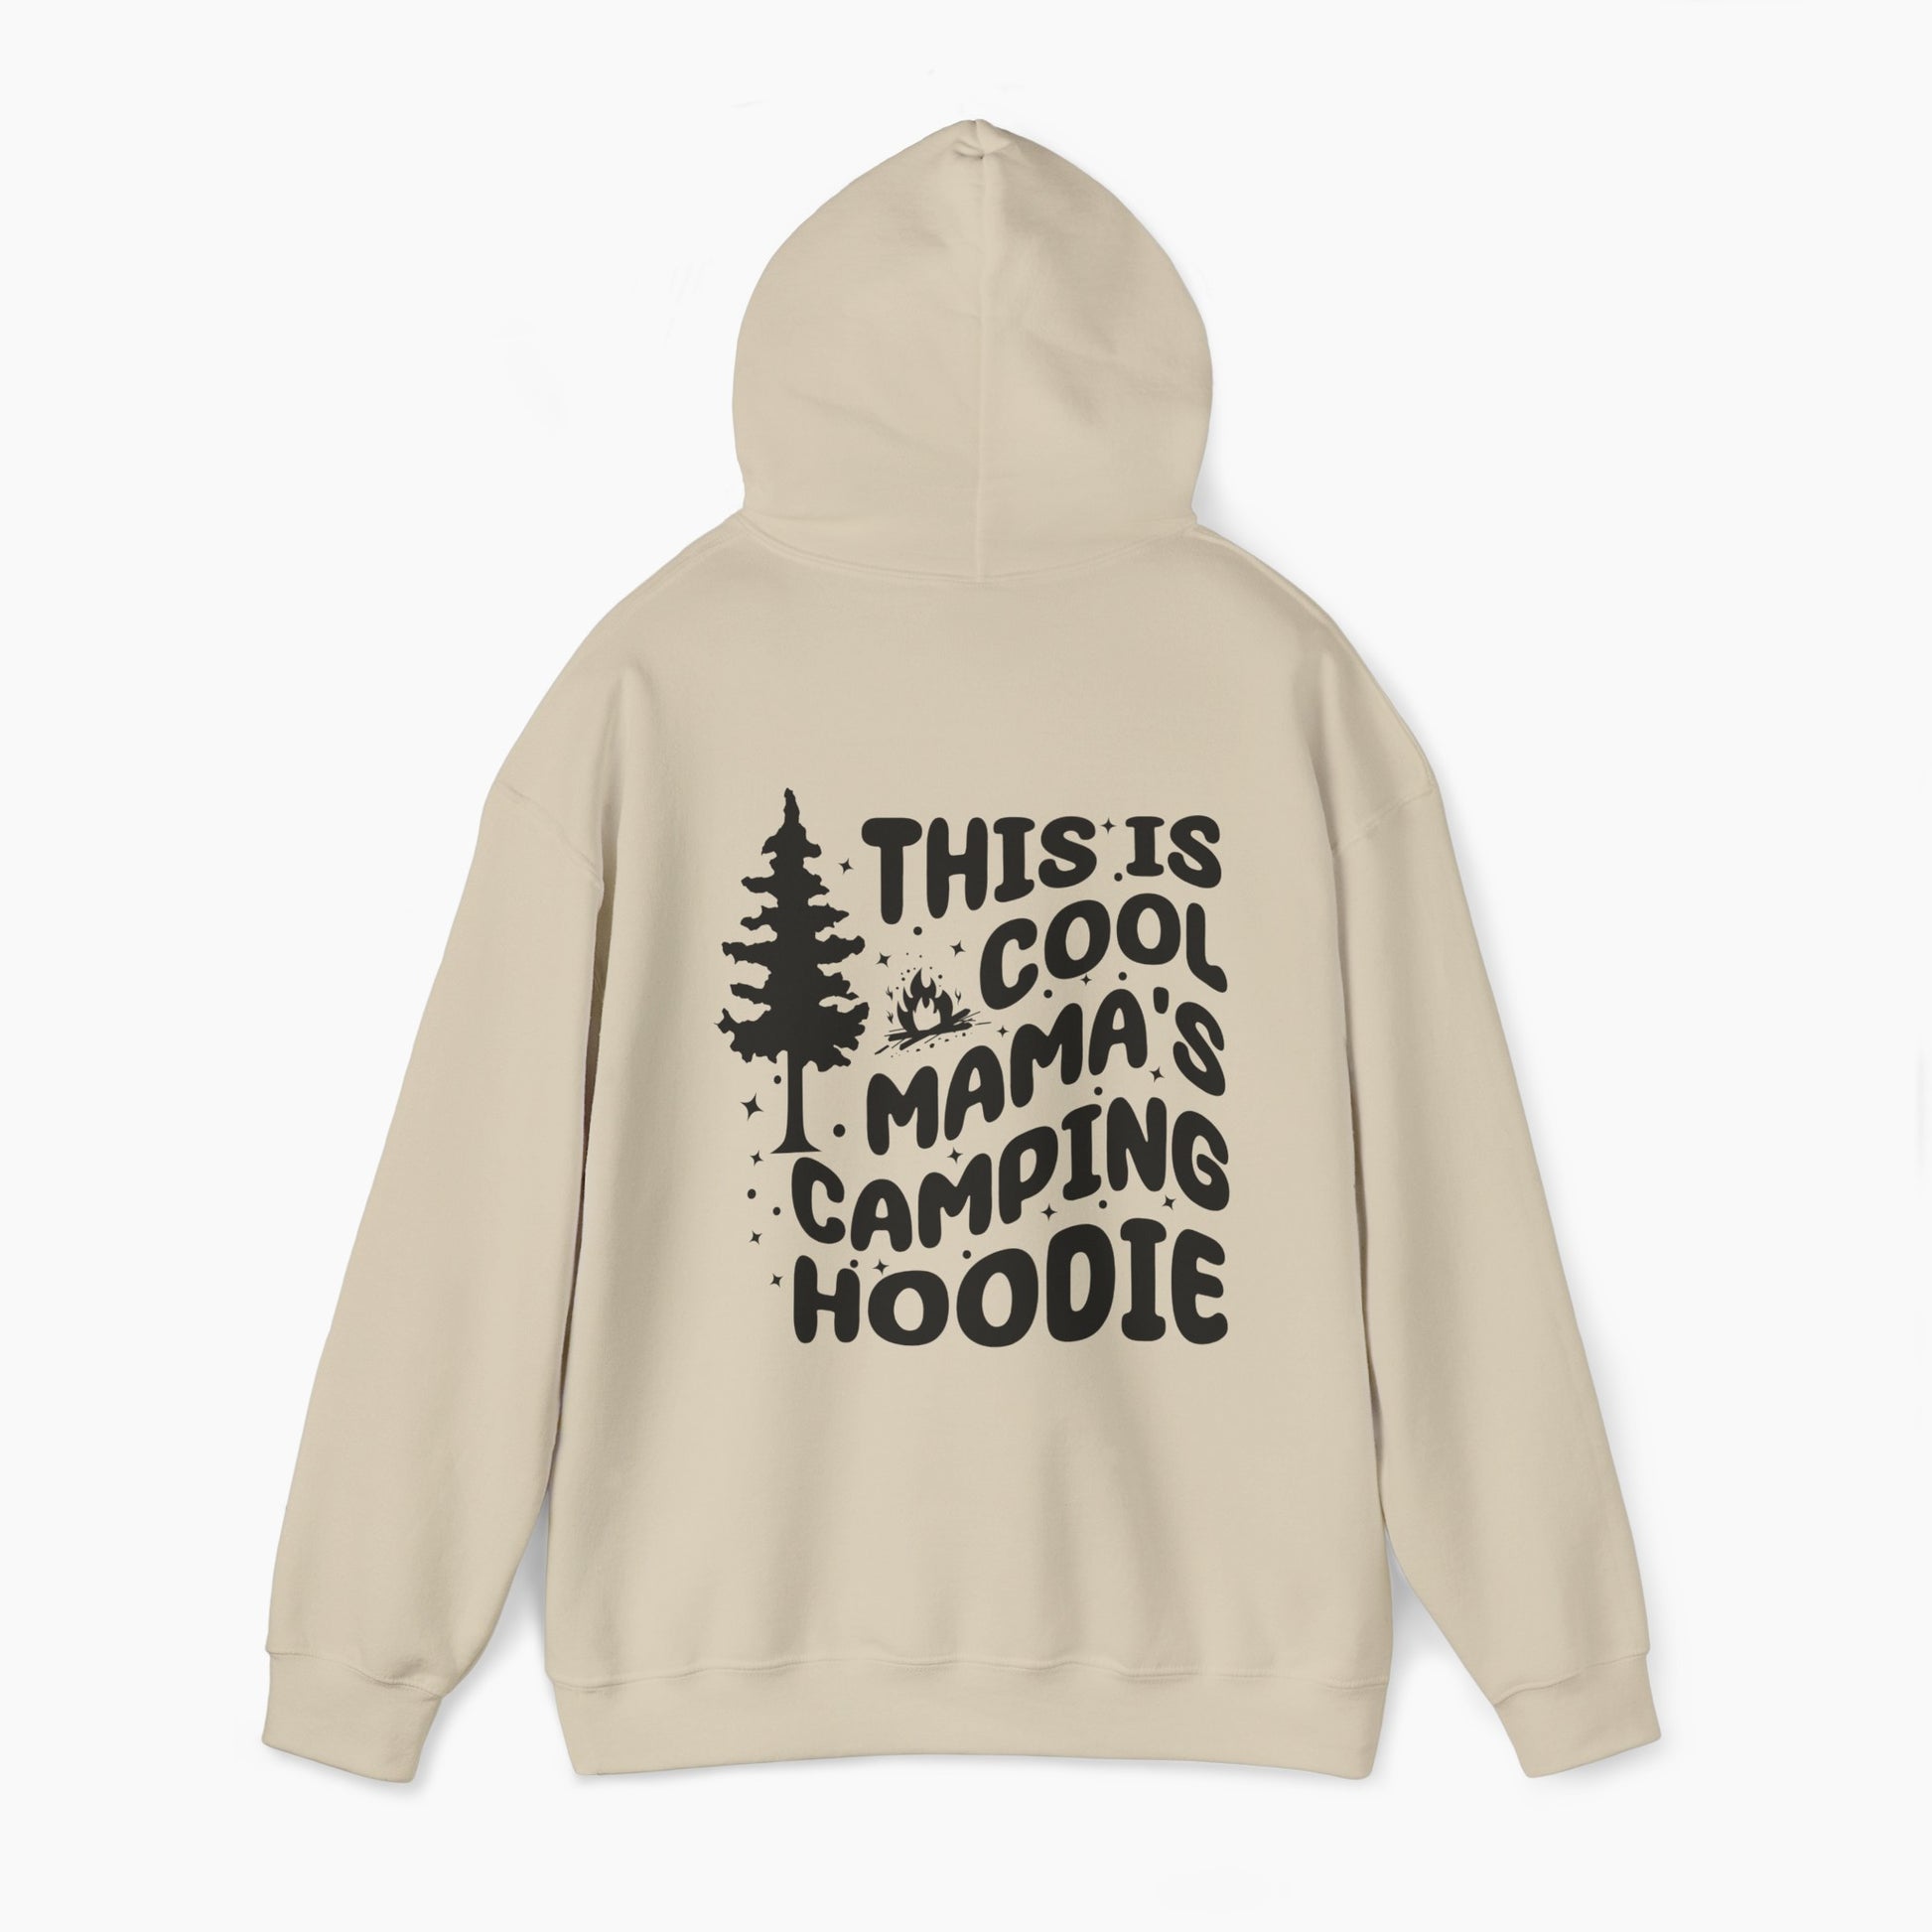 Sand color hoodie with the text 'This is cool mama's camping hoodie' on the back, featuring a tree and stars design on a plain background.